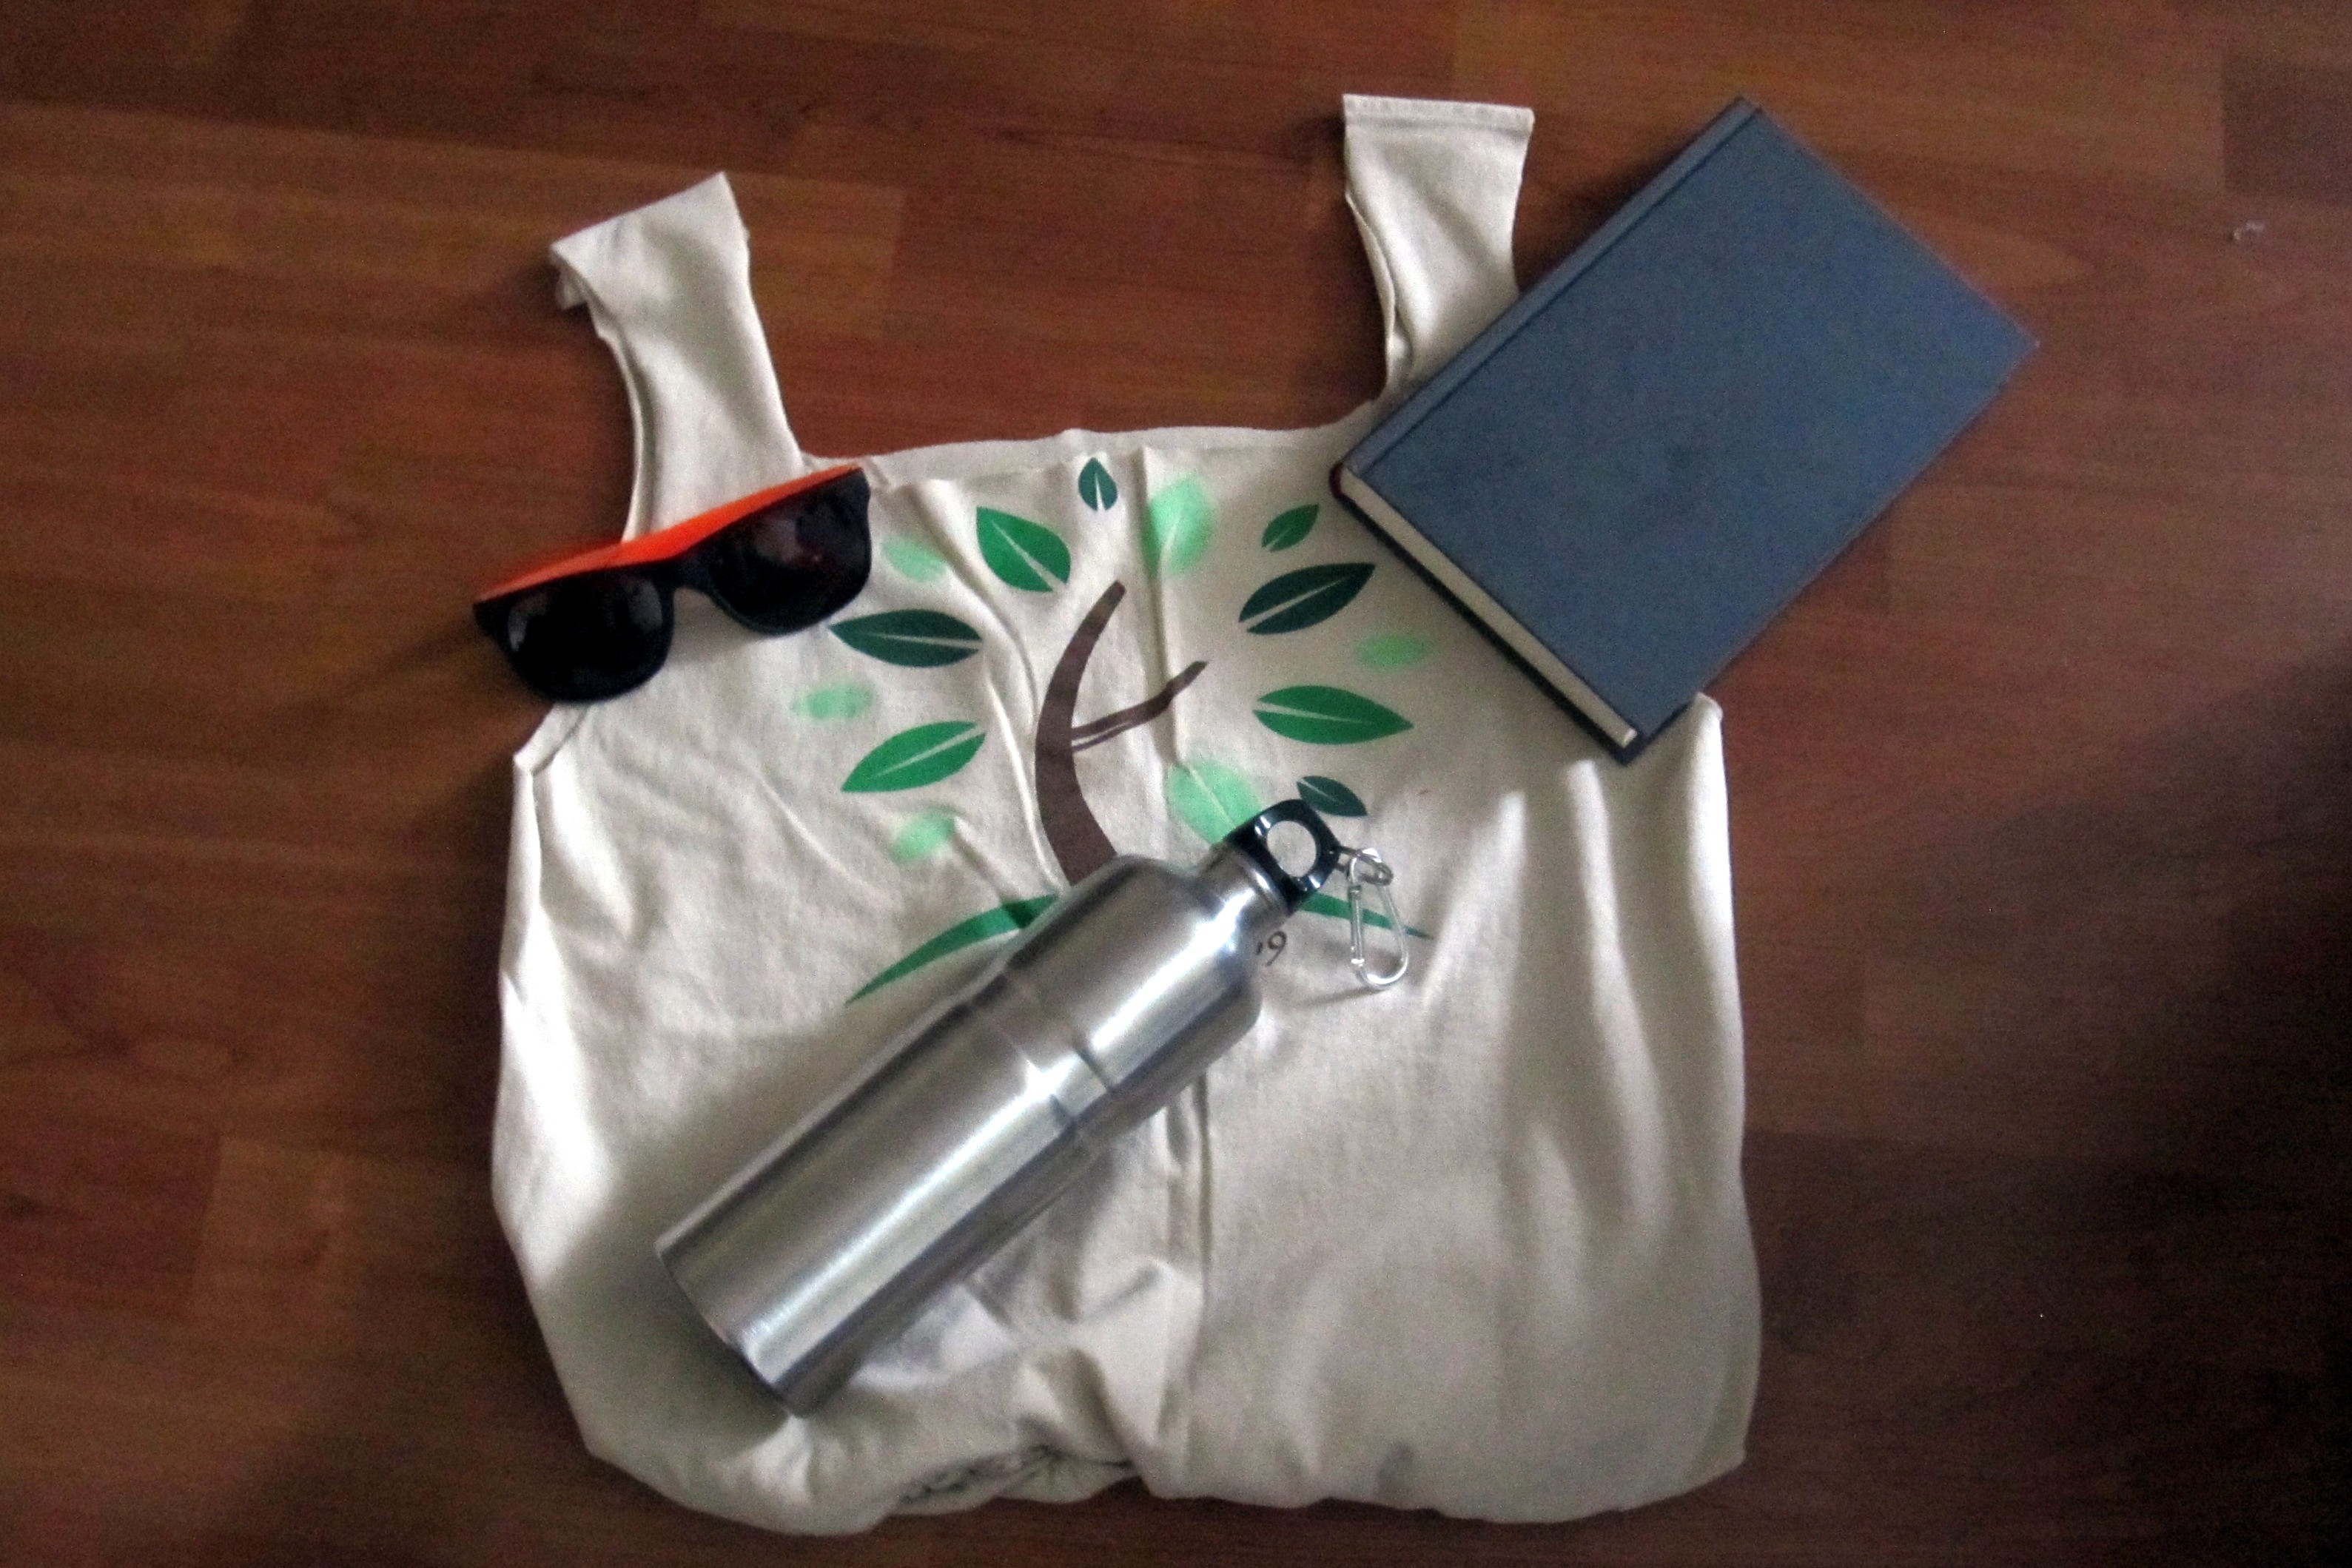 t-shirt bag, sunglasses, water bottle, and book